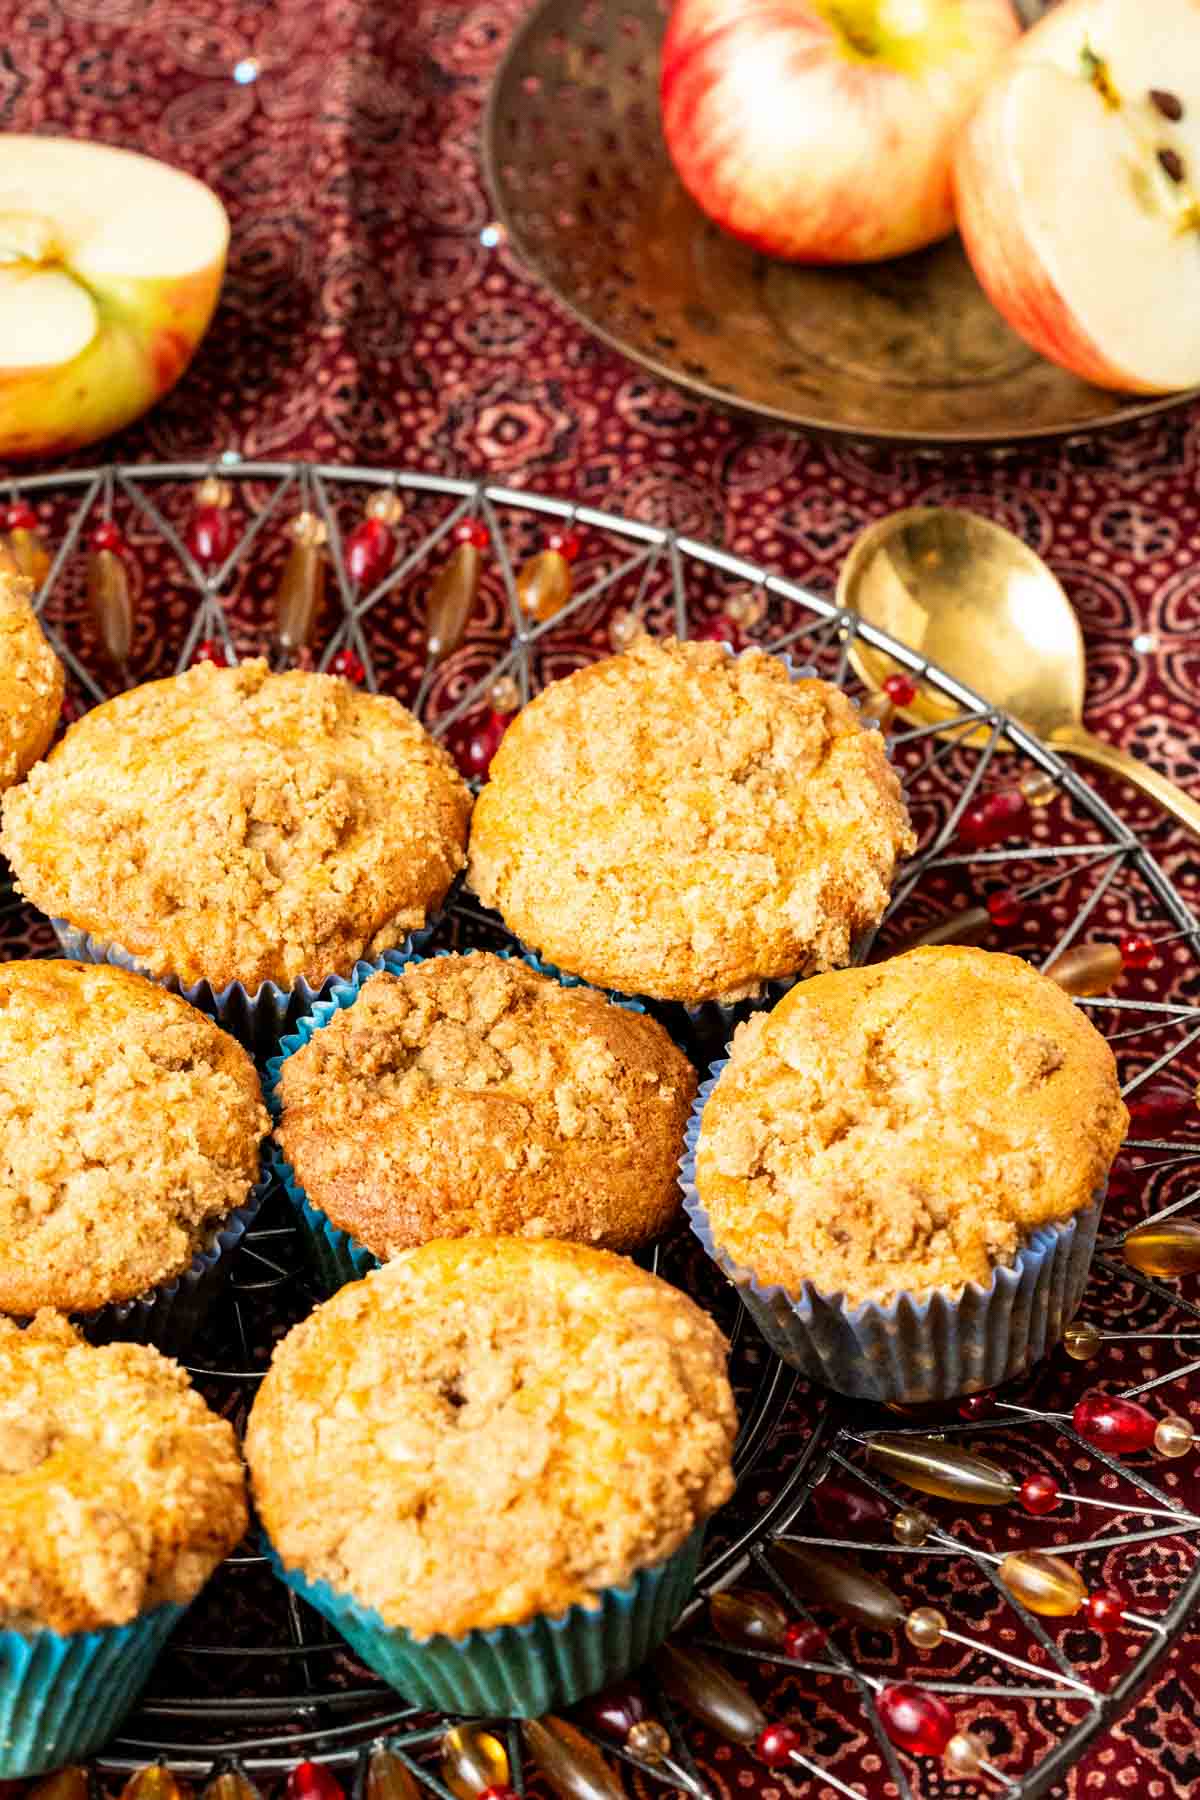 Apple muffins sitting in a plate with golden spoon on the side.